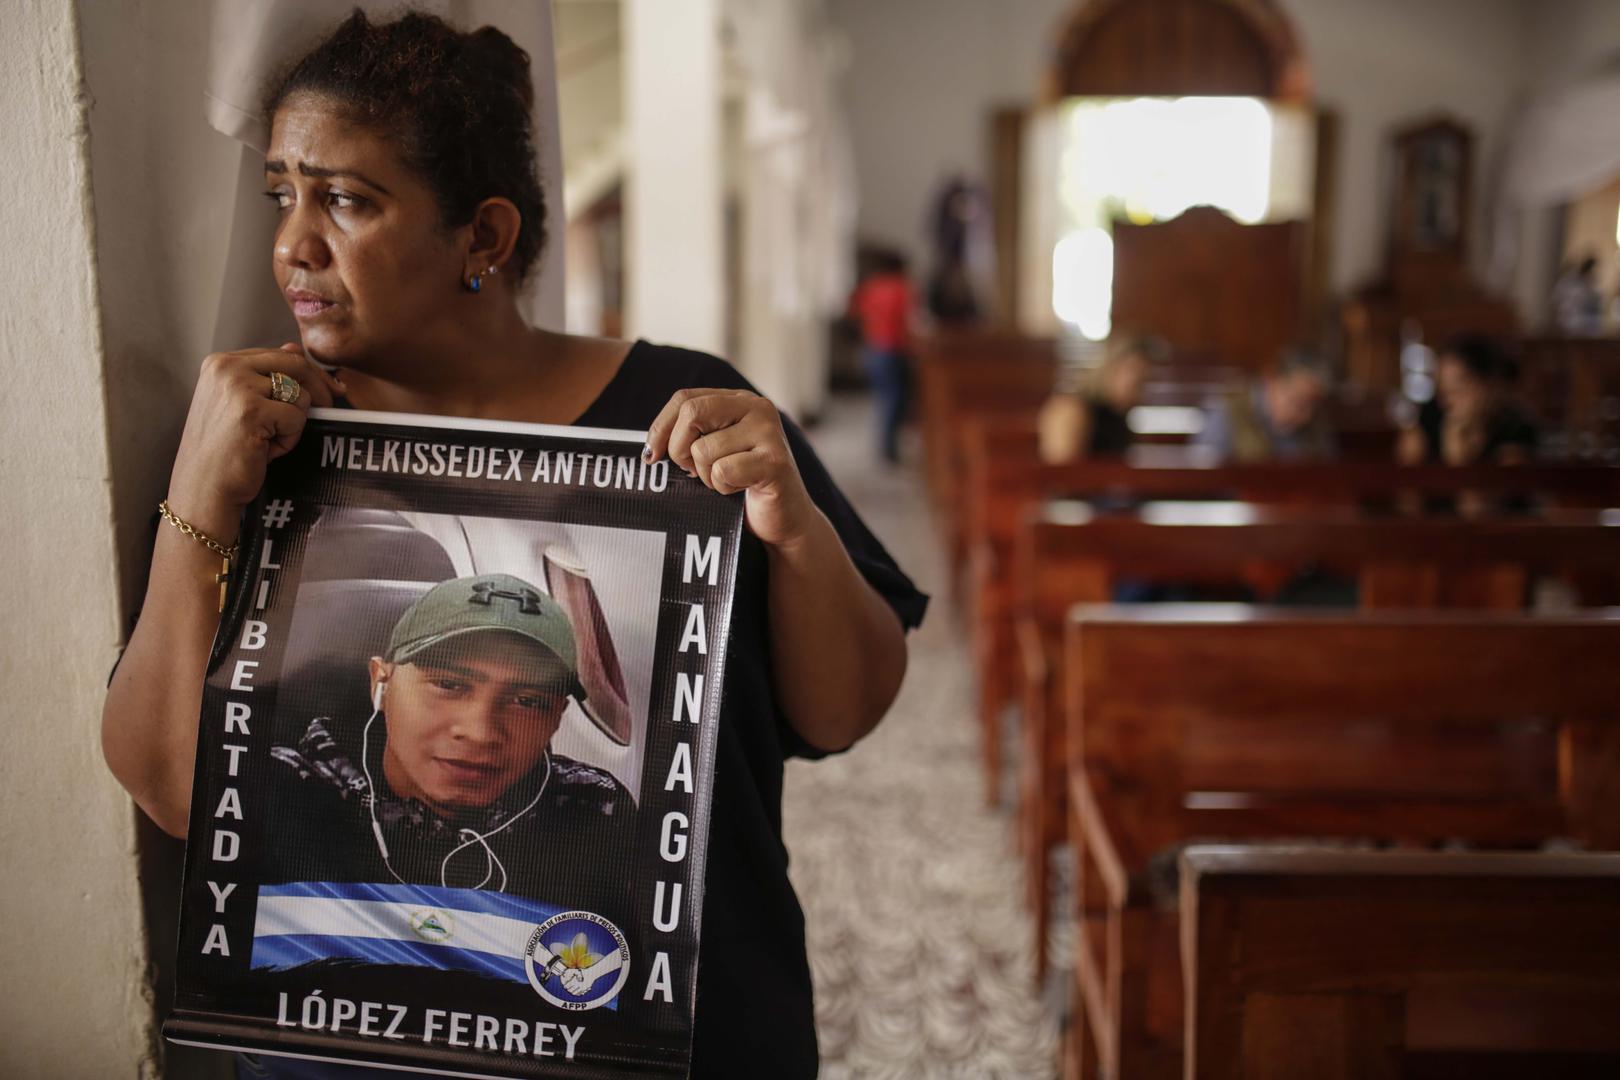 Martha Lorena Alvarado, mother of jailed anti-government demonstrator Melkissedex Antonio Lopez, holds a sign with an image of her son while participating in the hunger strike at the San Miguel Arcangel Church in Masaya, Nicaragua, on Thursday, November 1